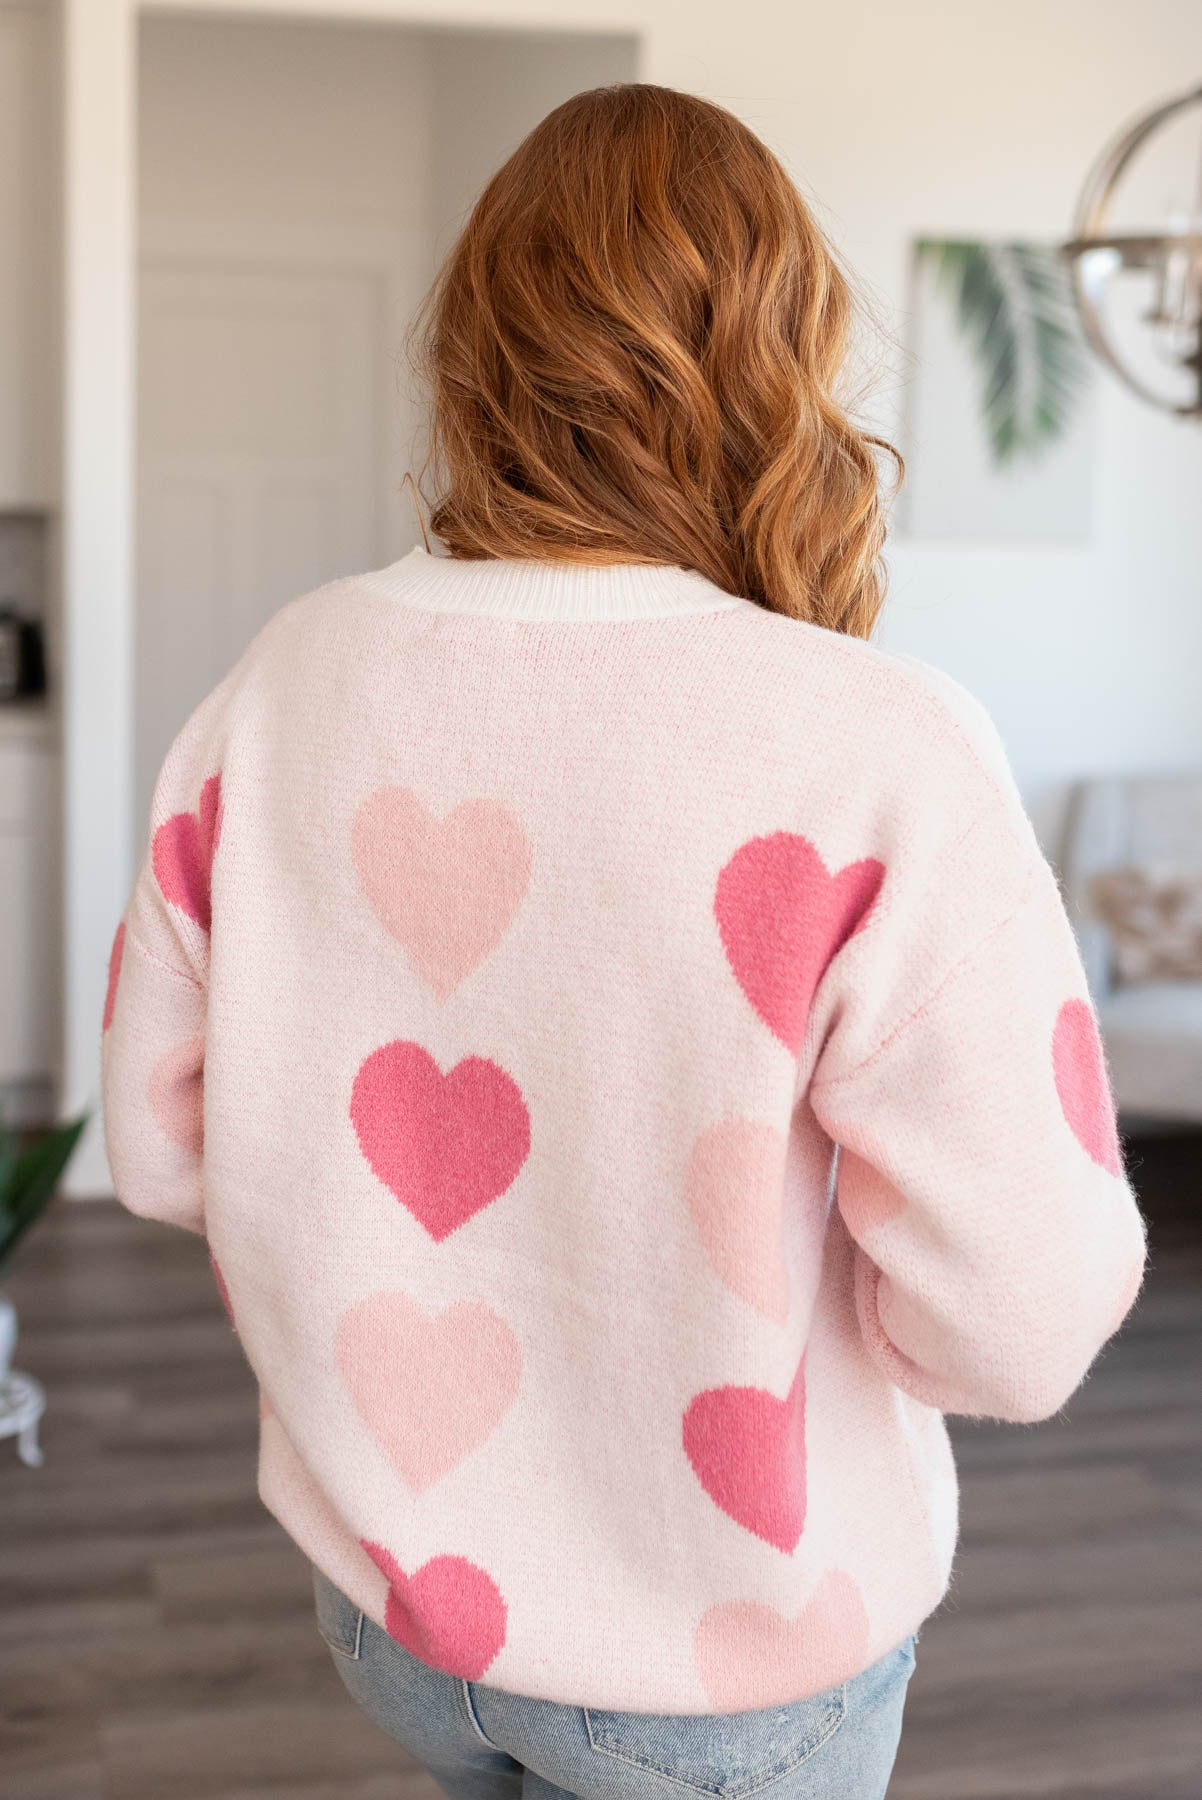 Back view of a pink heart sweater